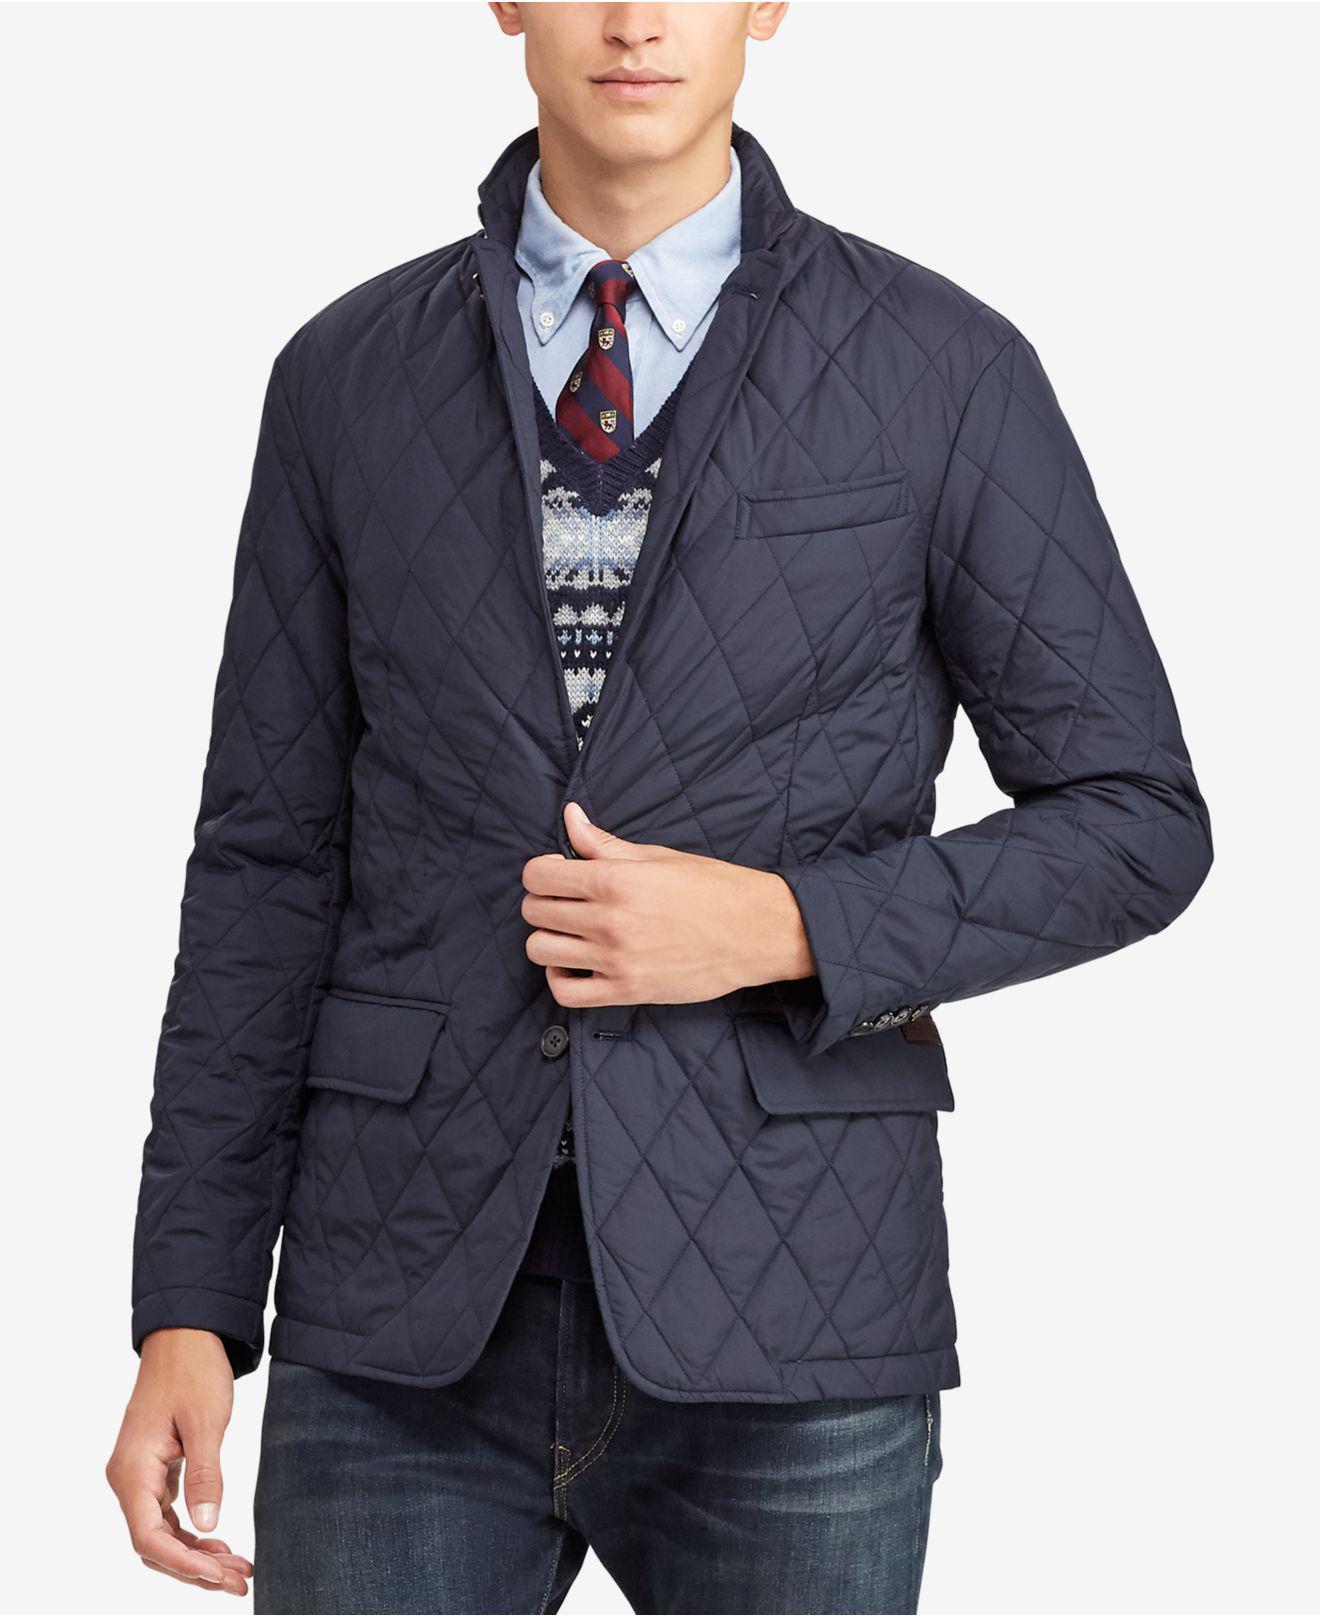 Polo Ralph Lauren Leather Quilted Sportscoat in Navy (Blue) for Men - Lyst